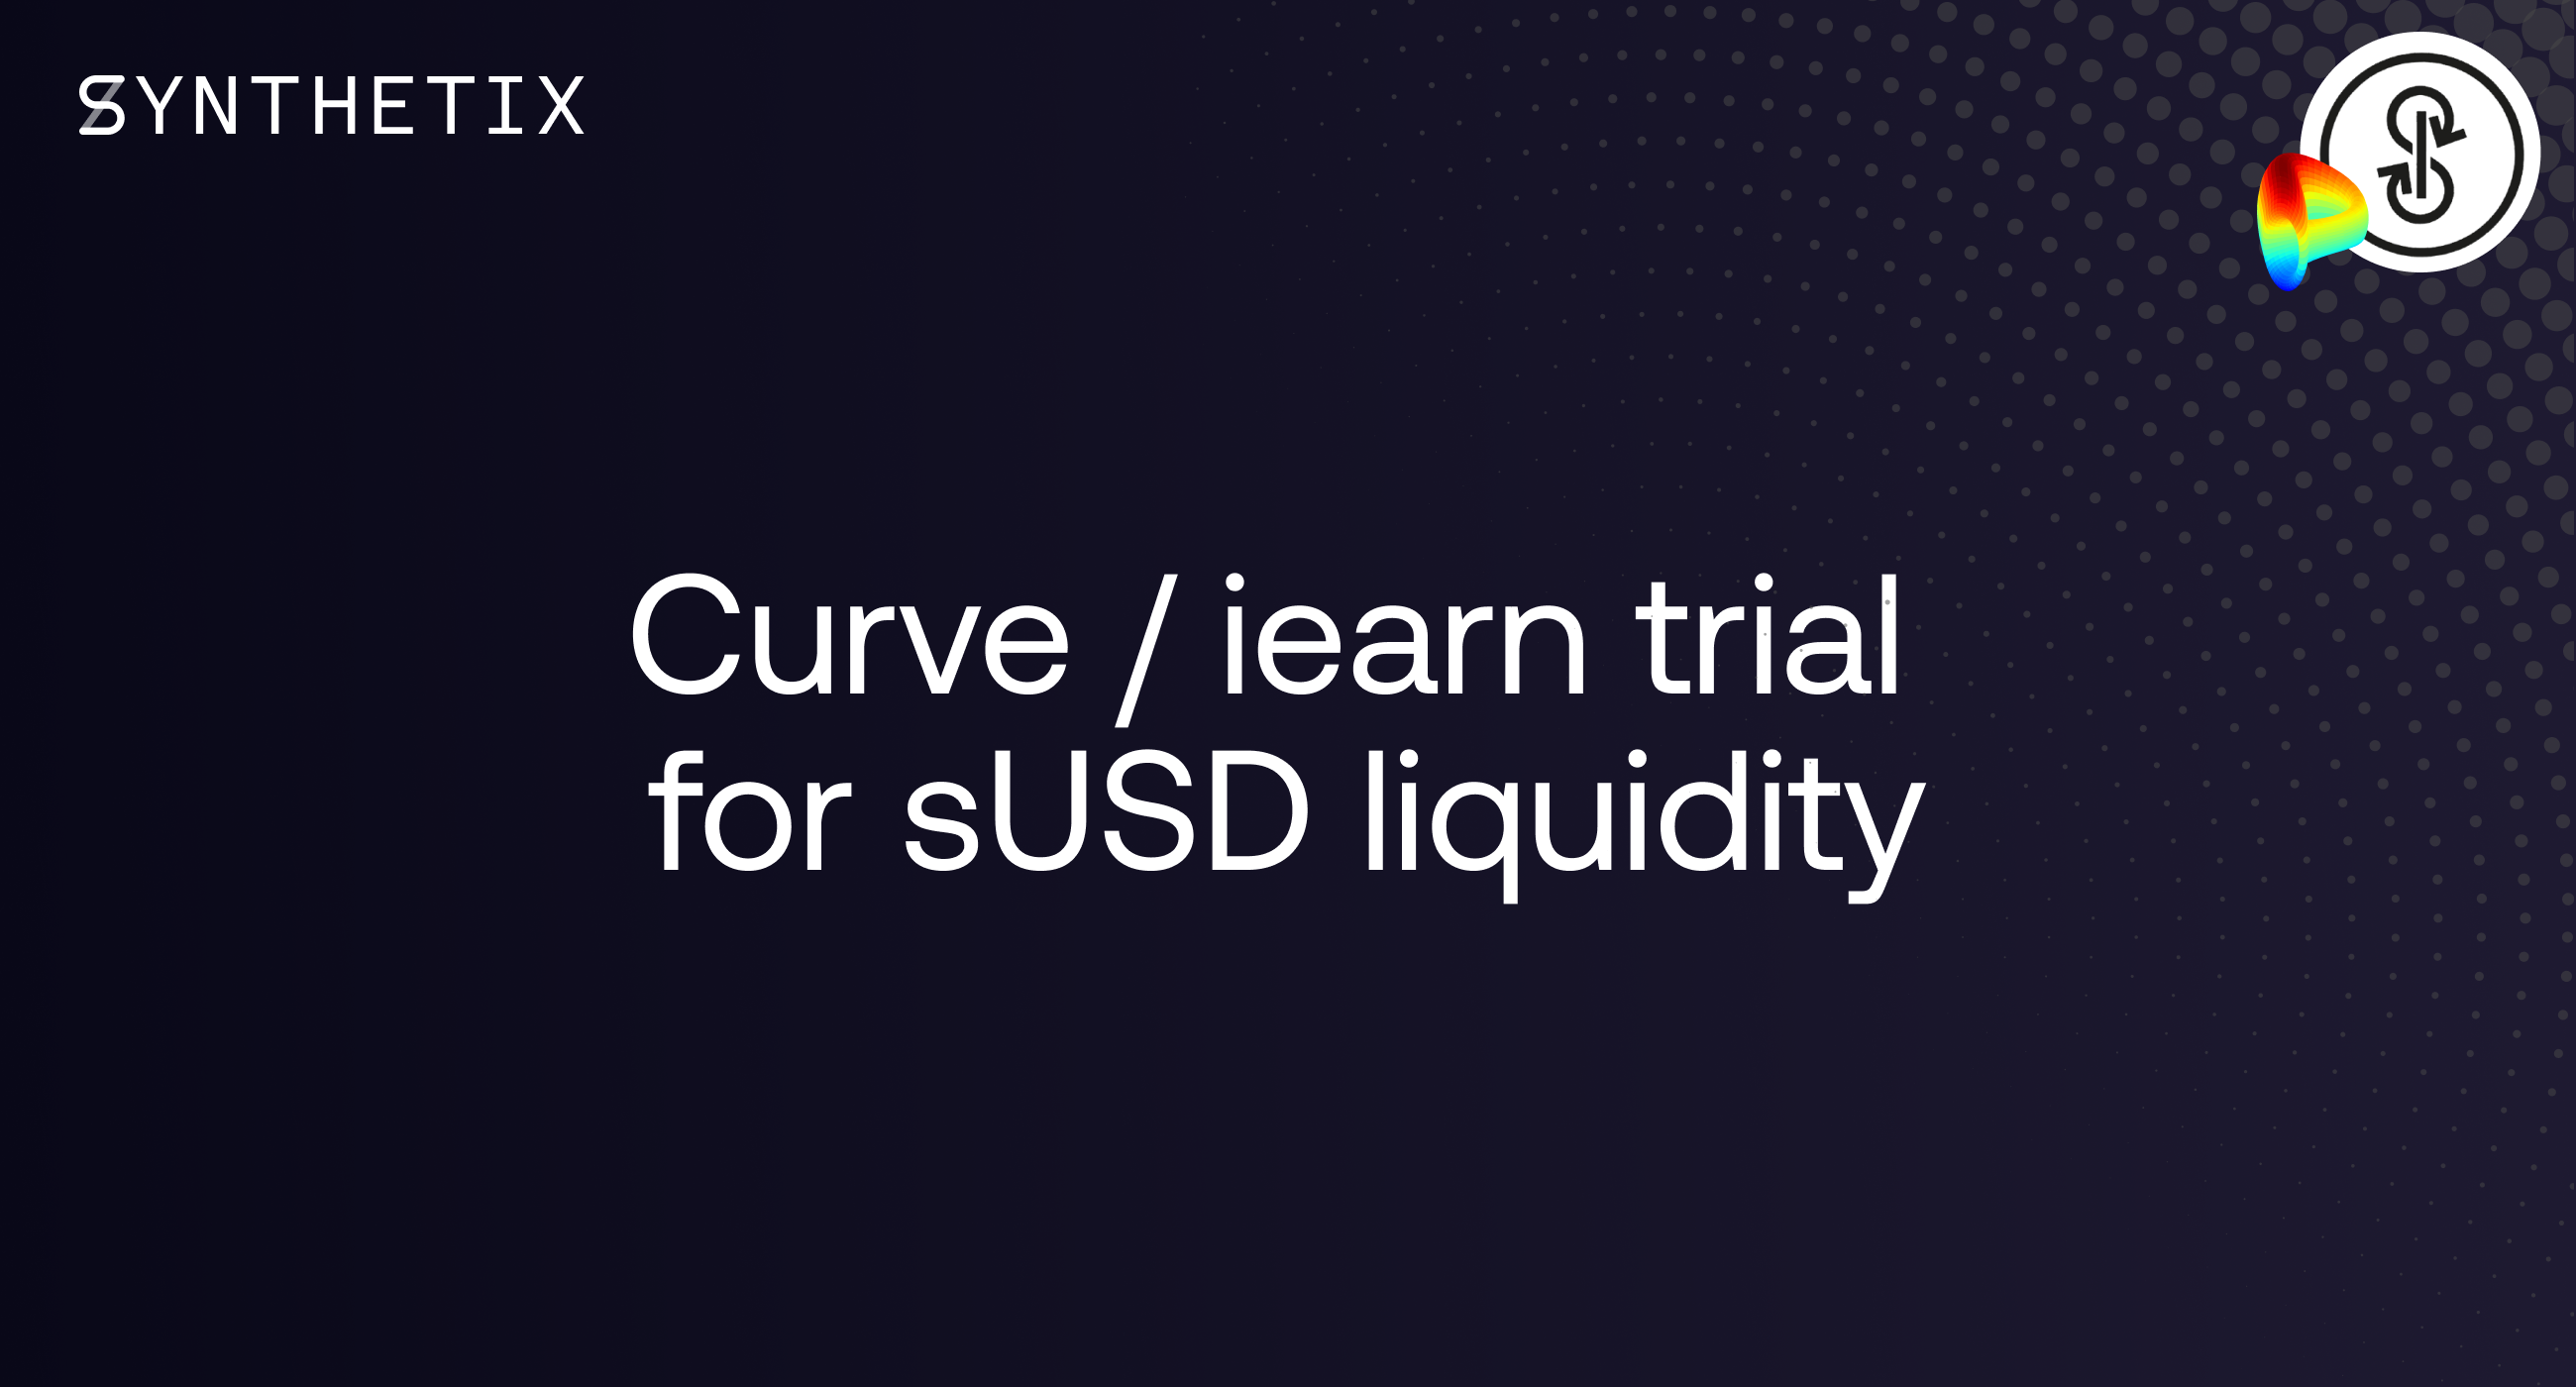 sUSD liquidity trial with Curve/iearn